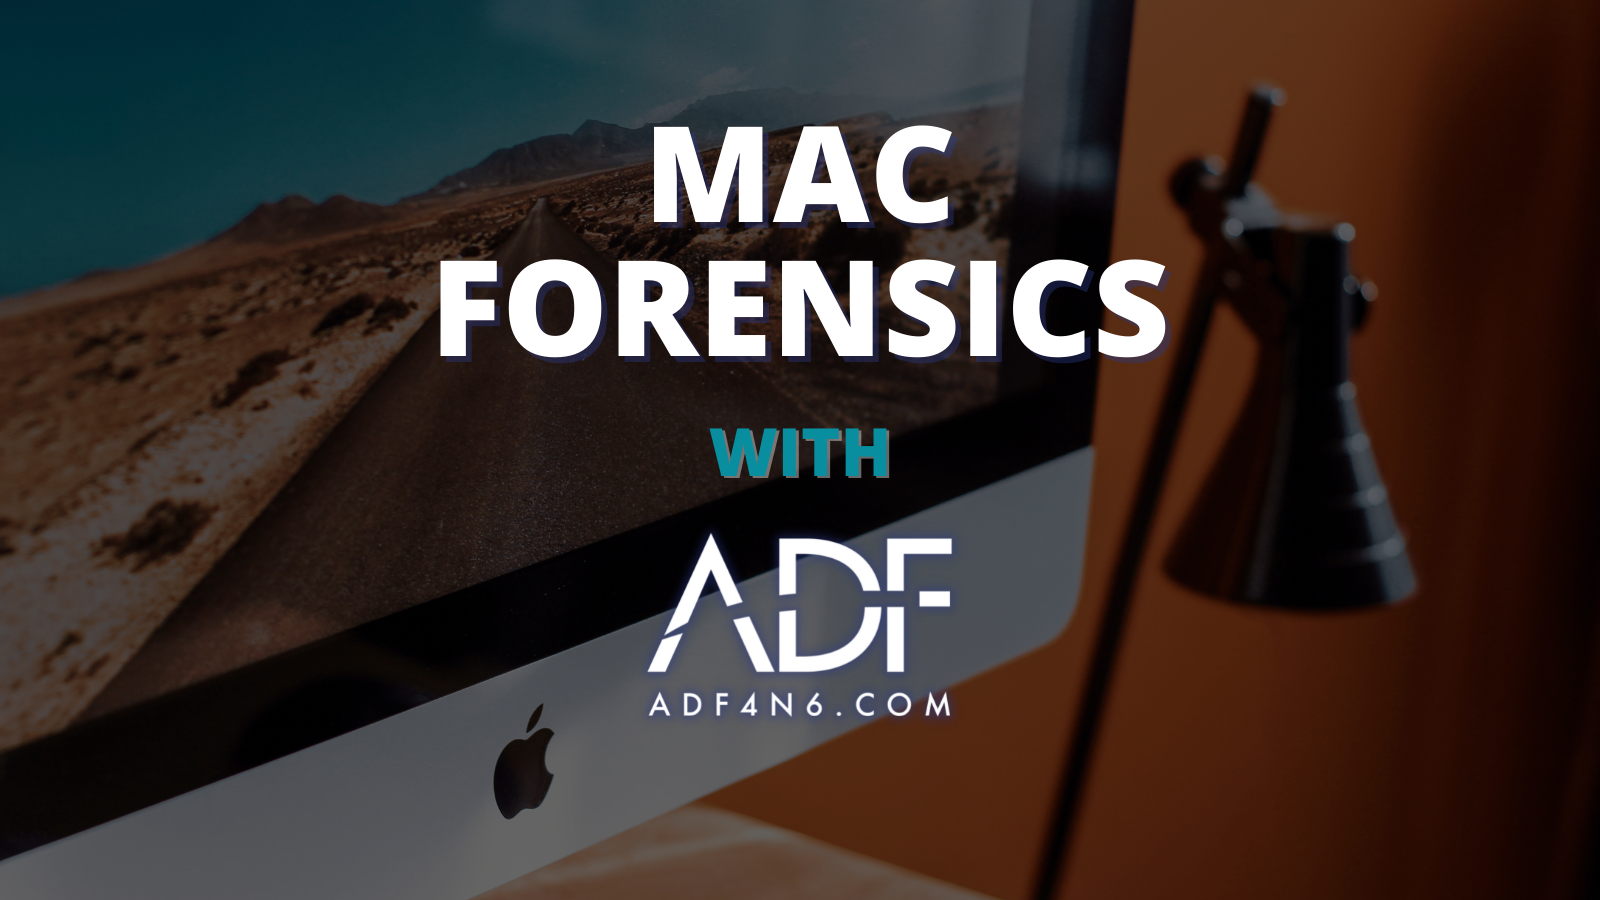 Mac Forensics: Learn to acquire digital evidence on MacOS computers